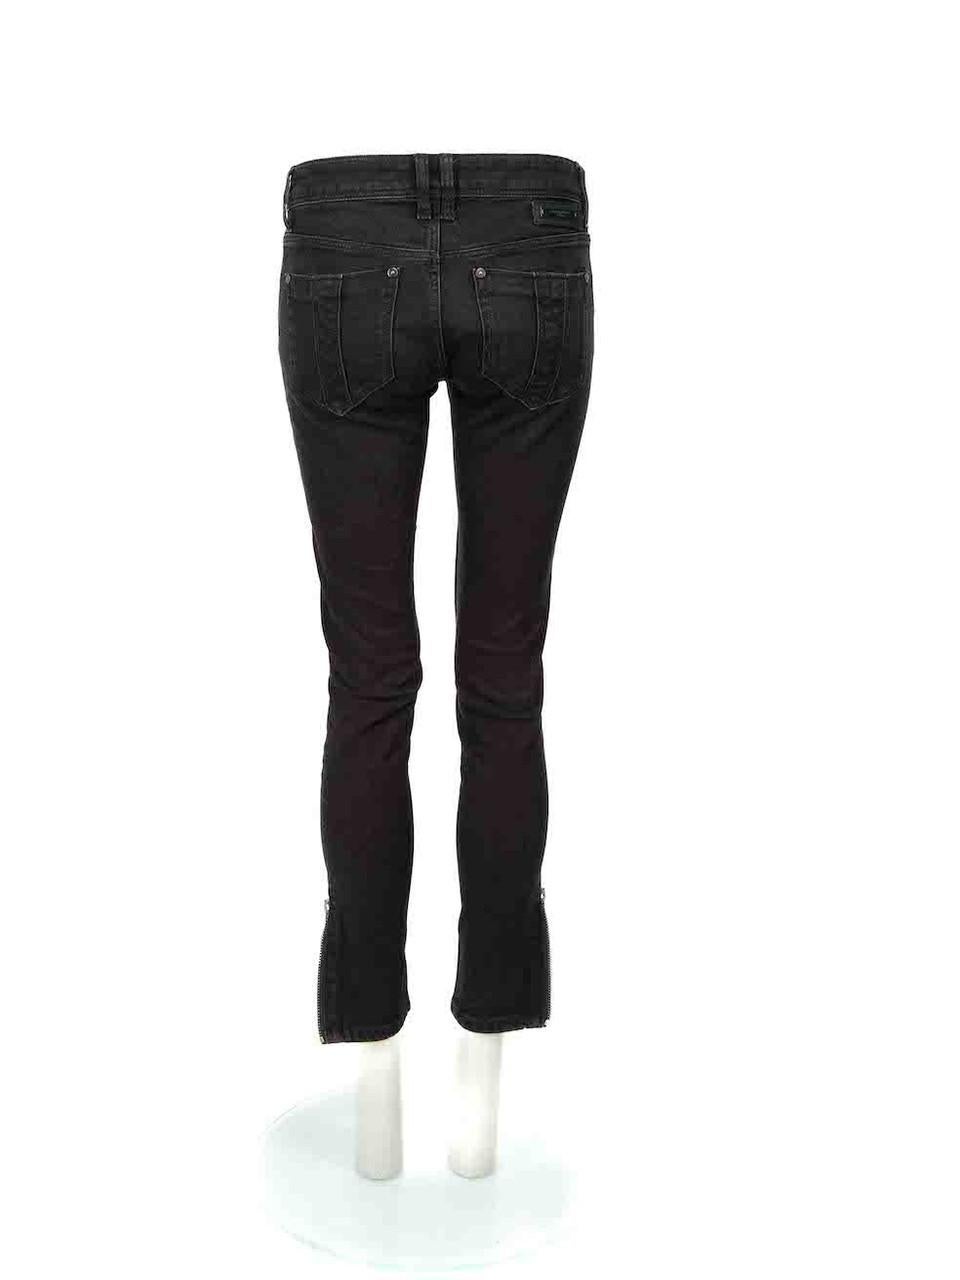 Burberry Black Zipped Cuff Skinny Jeans Size S In Good Condition For Sale In London, GB